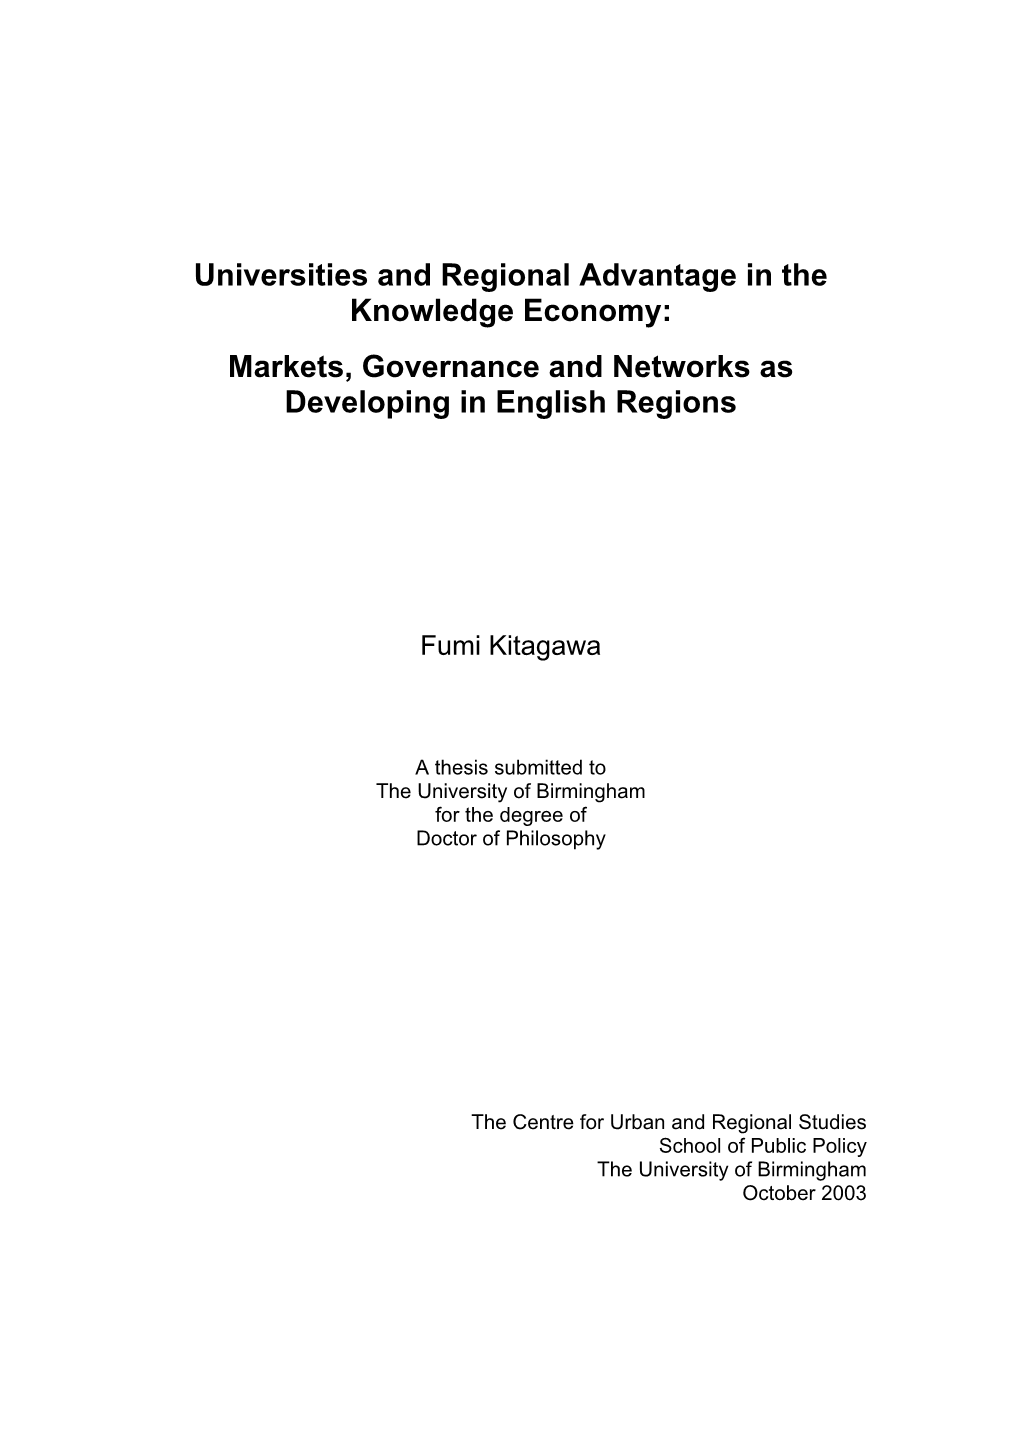 Markets, Governance and Networks As Developing in English Regions